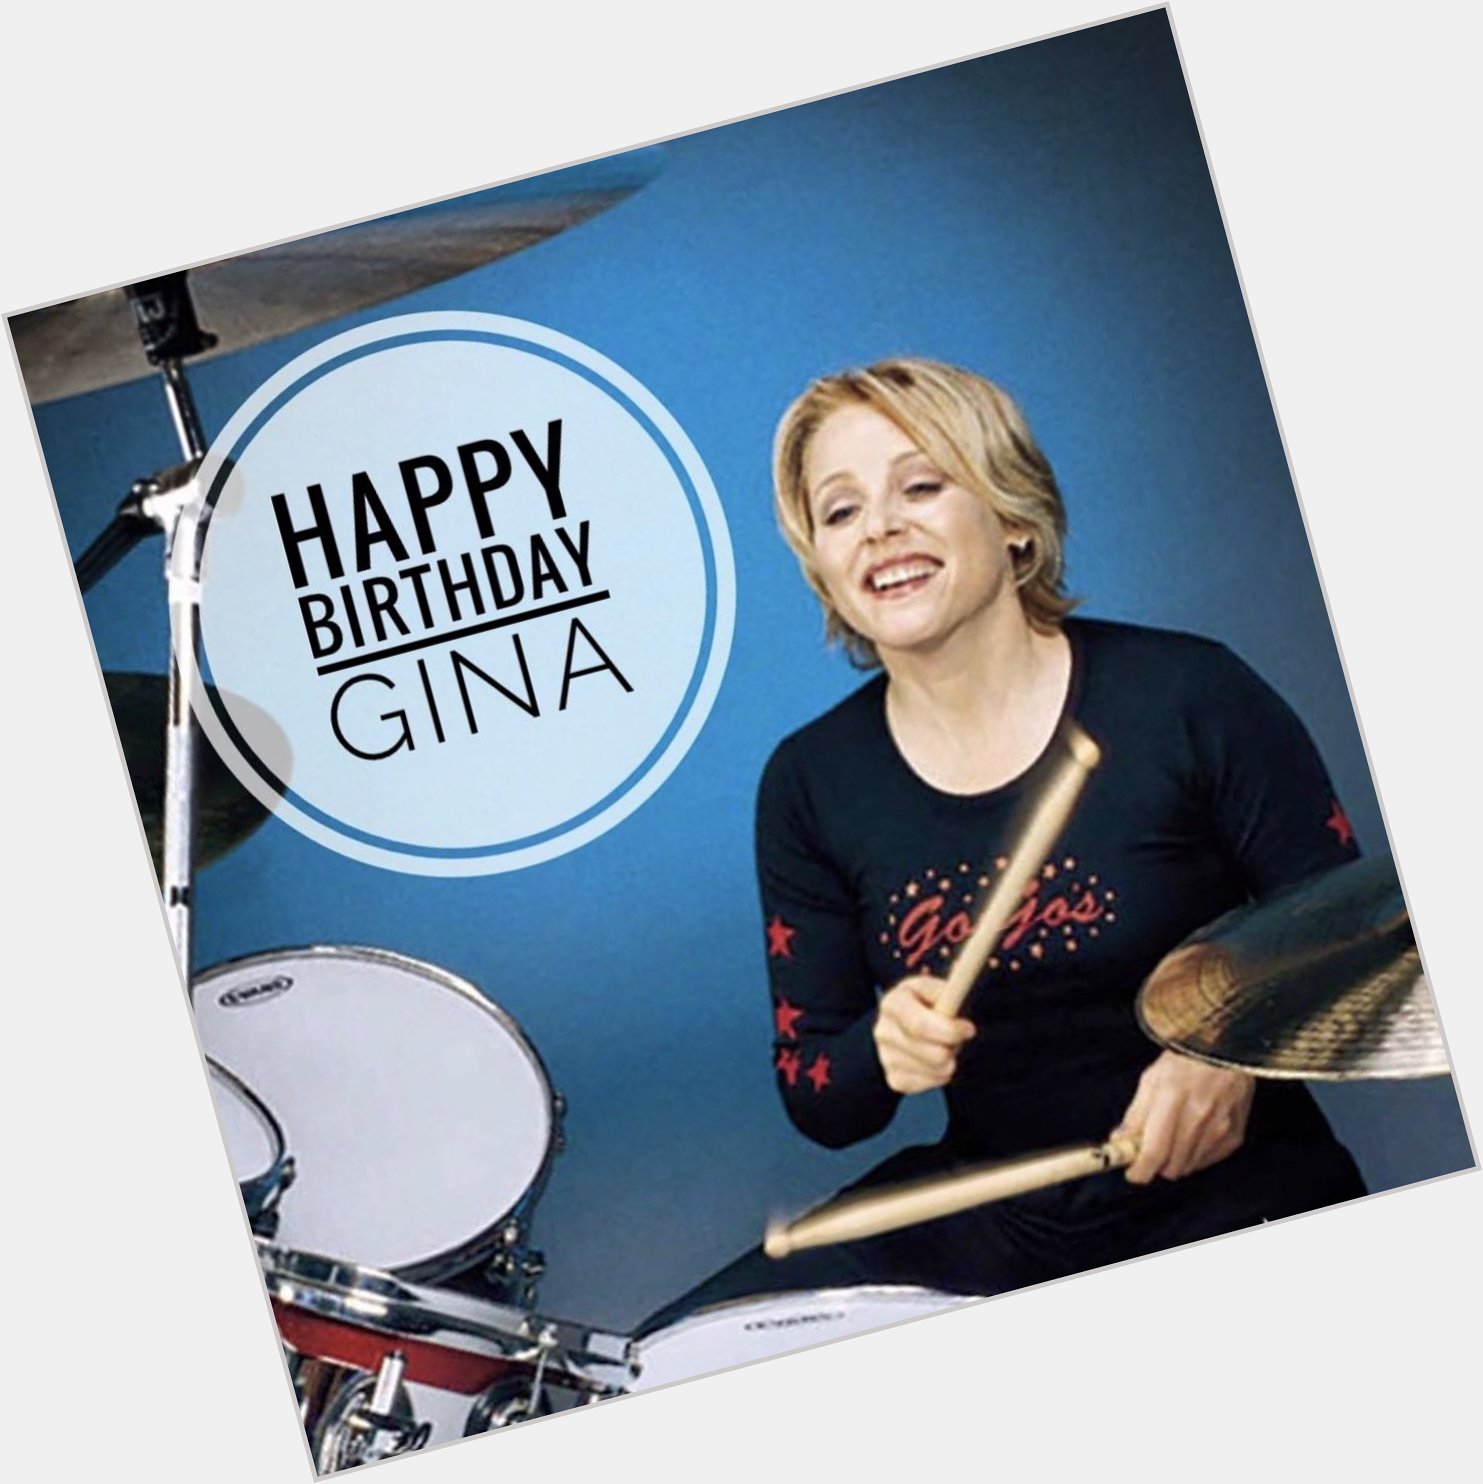 HAPPY BIRTHDAY to our incredible, one-of-a-kind powerhouse Gina Schock!! 